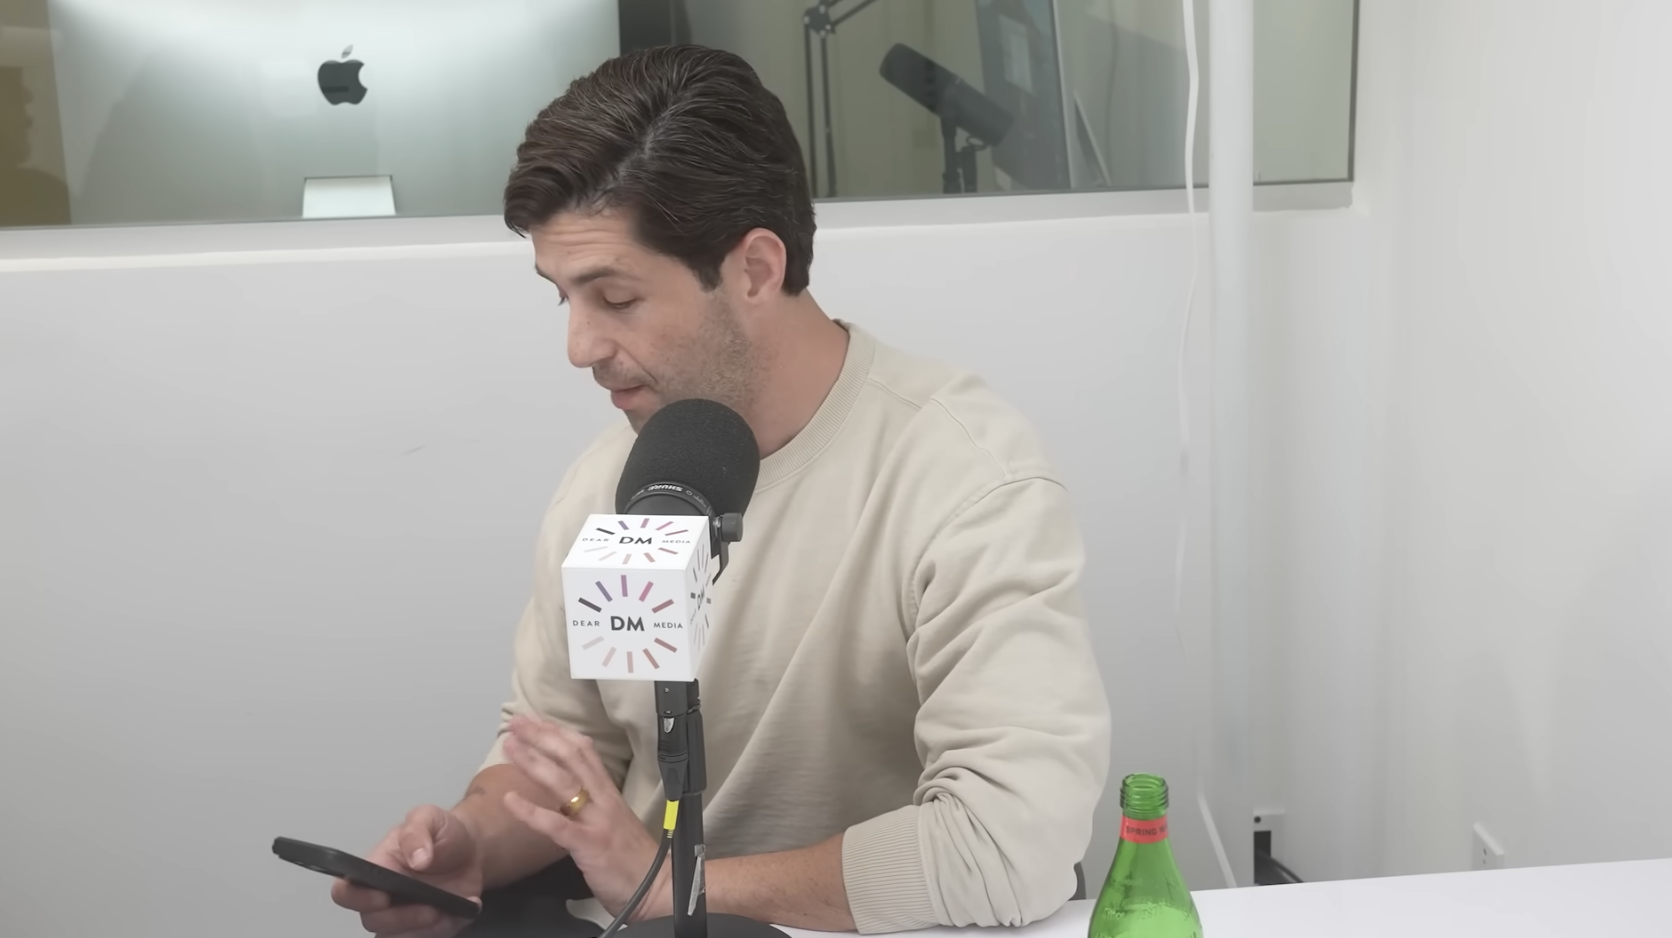 A close-up of Josh Peck looking at his phone during the interview